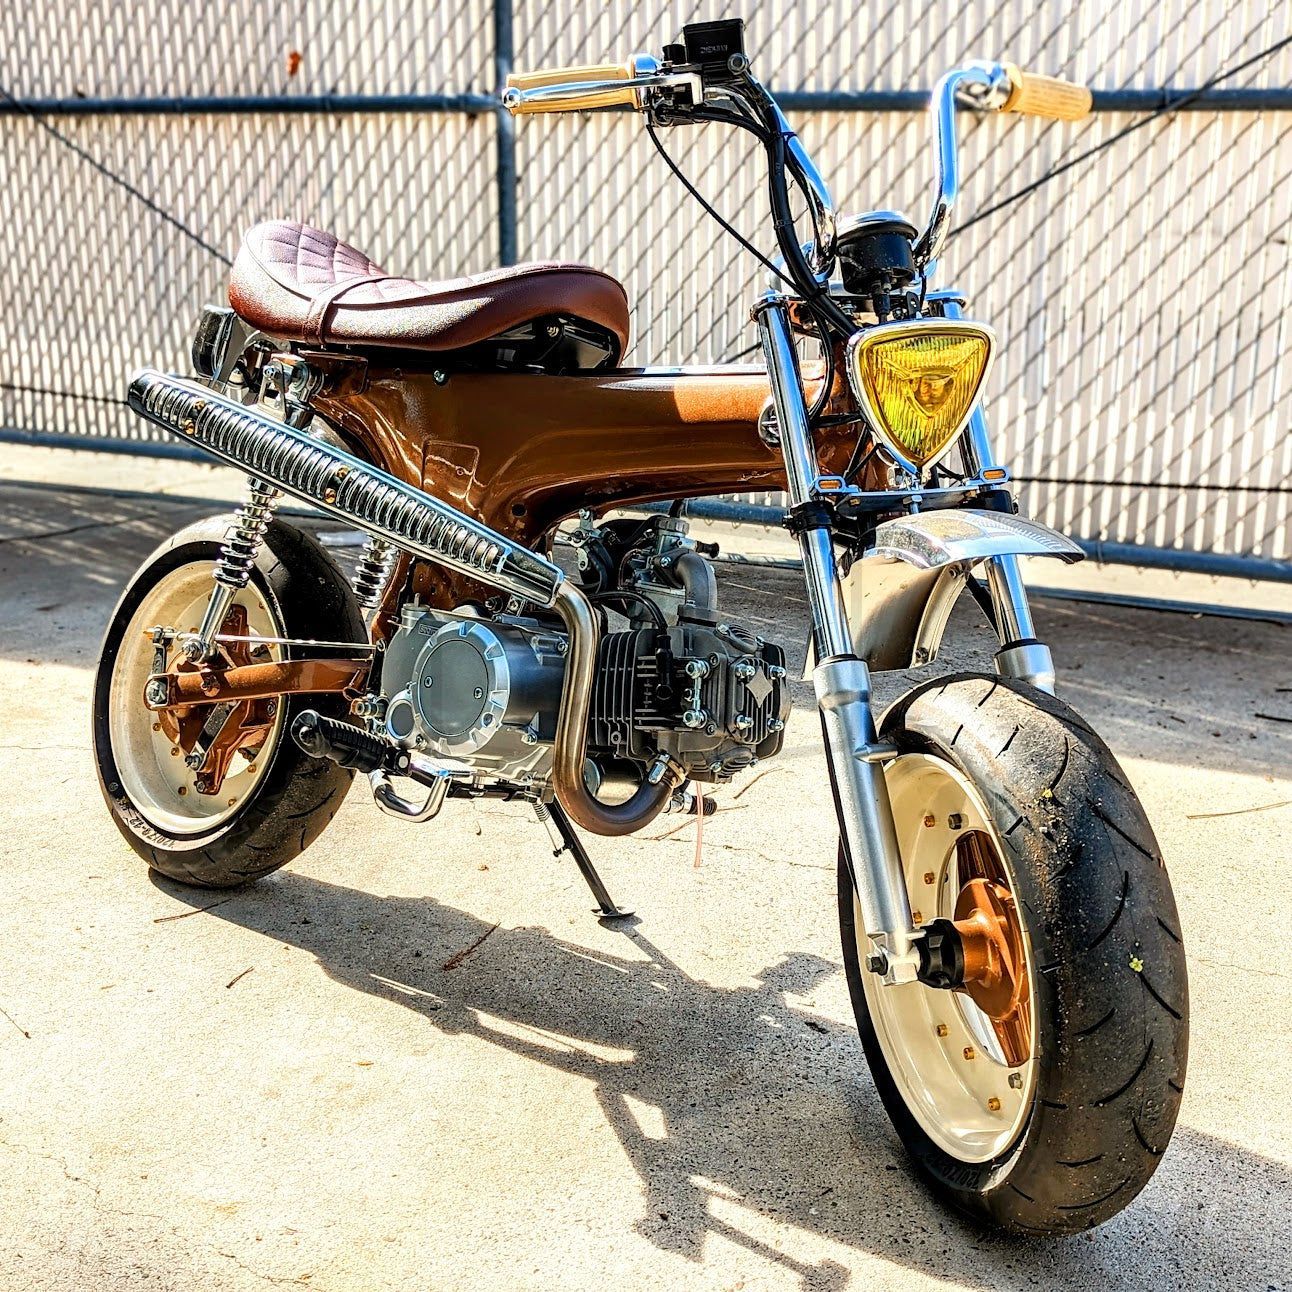 CT70 Brown Diamond Low Seat (Fits All CT70 and Clones)